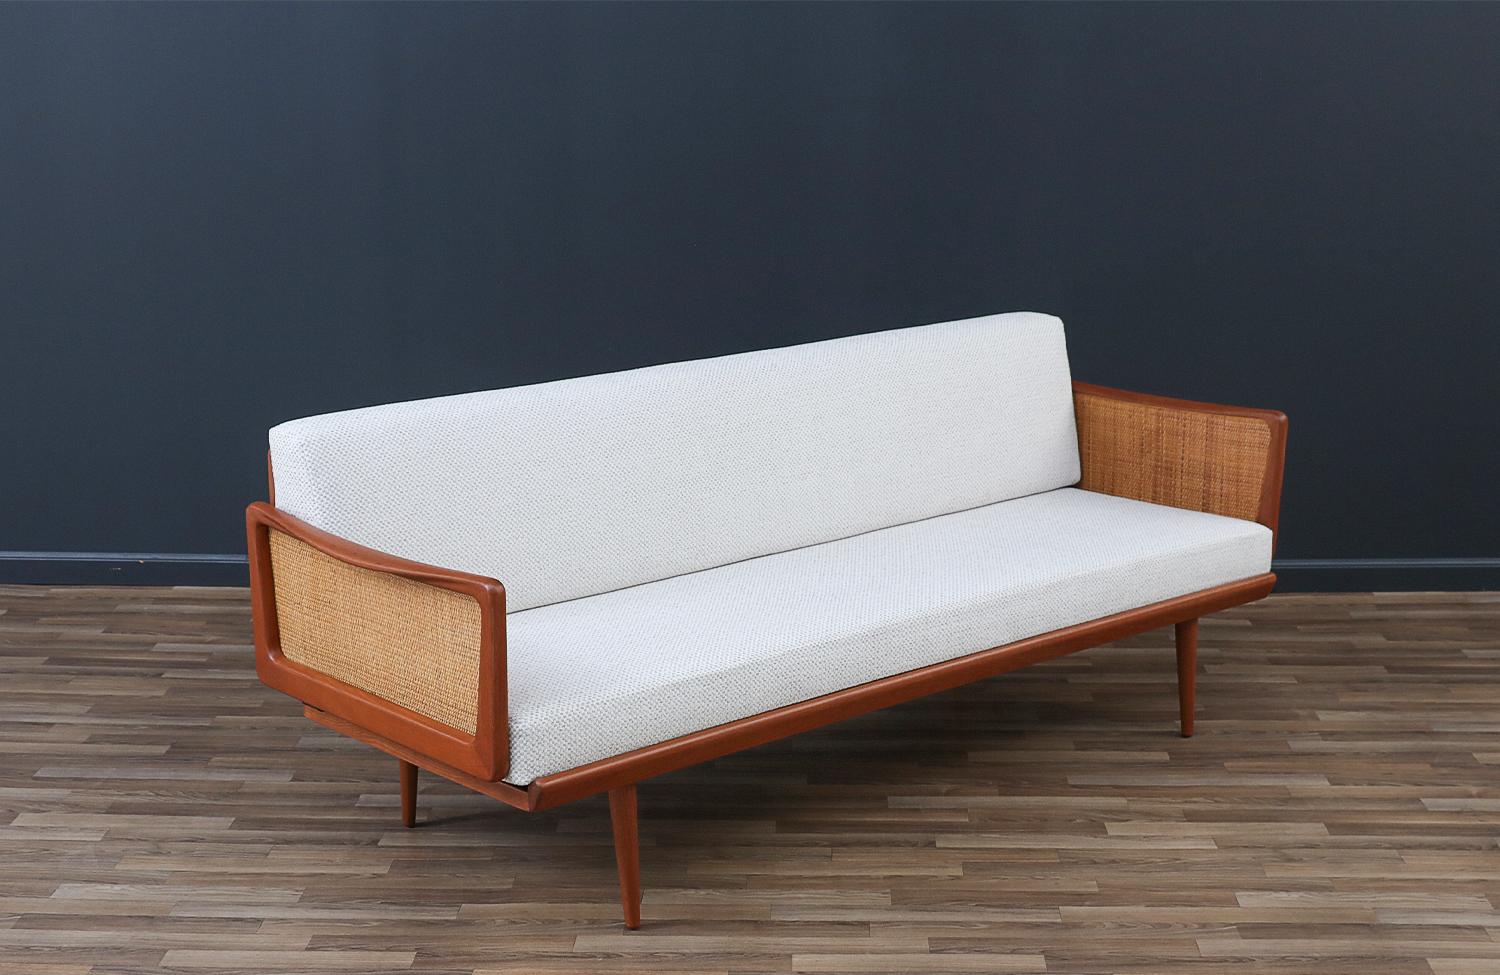 ________________________________________

Transforming a piece of Mid-Century Modern furniture is like bringing history back to life, and we take this journey with passion and precision. With over 17 years of artisanal expertise, our Los Angeles